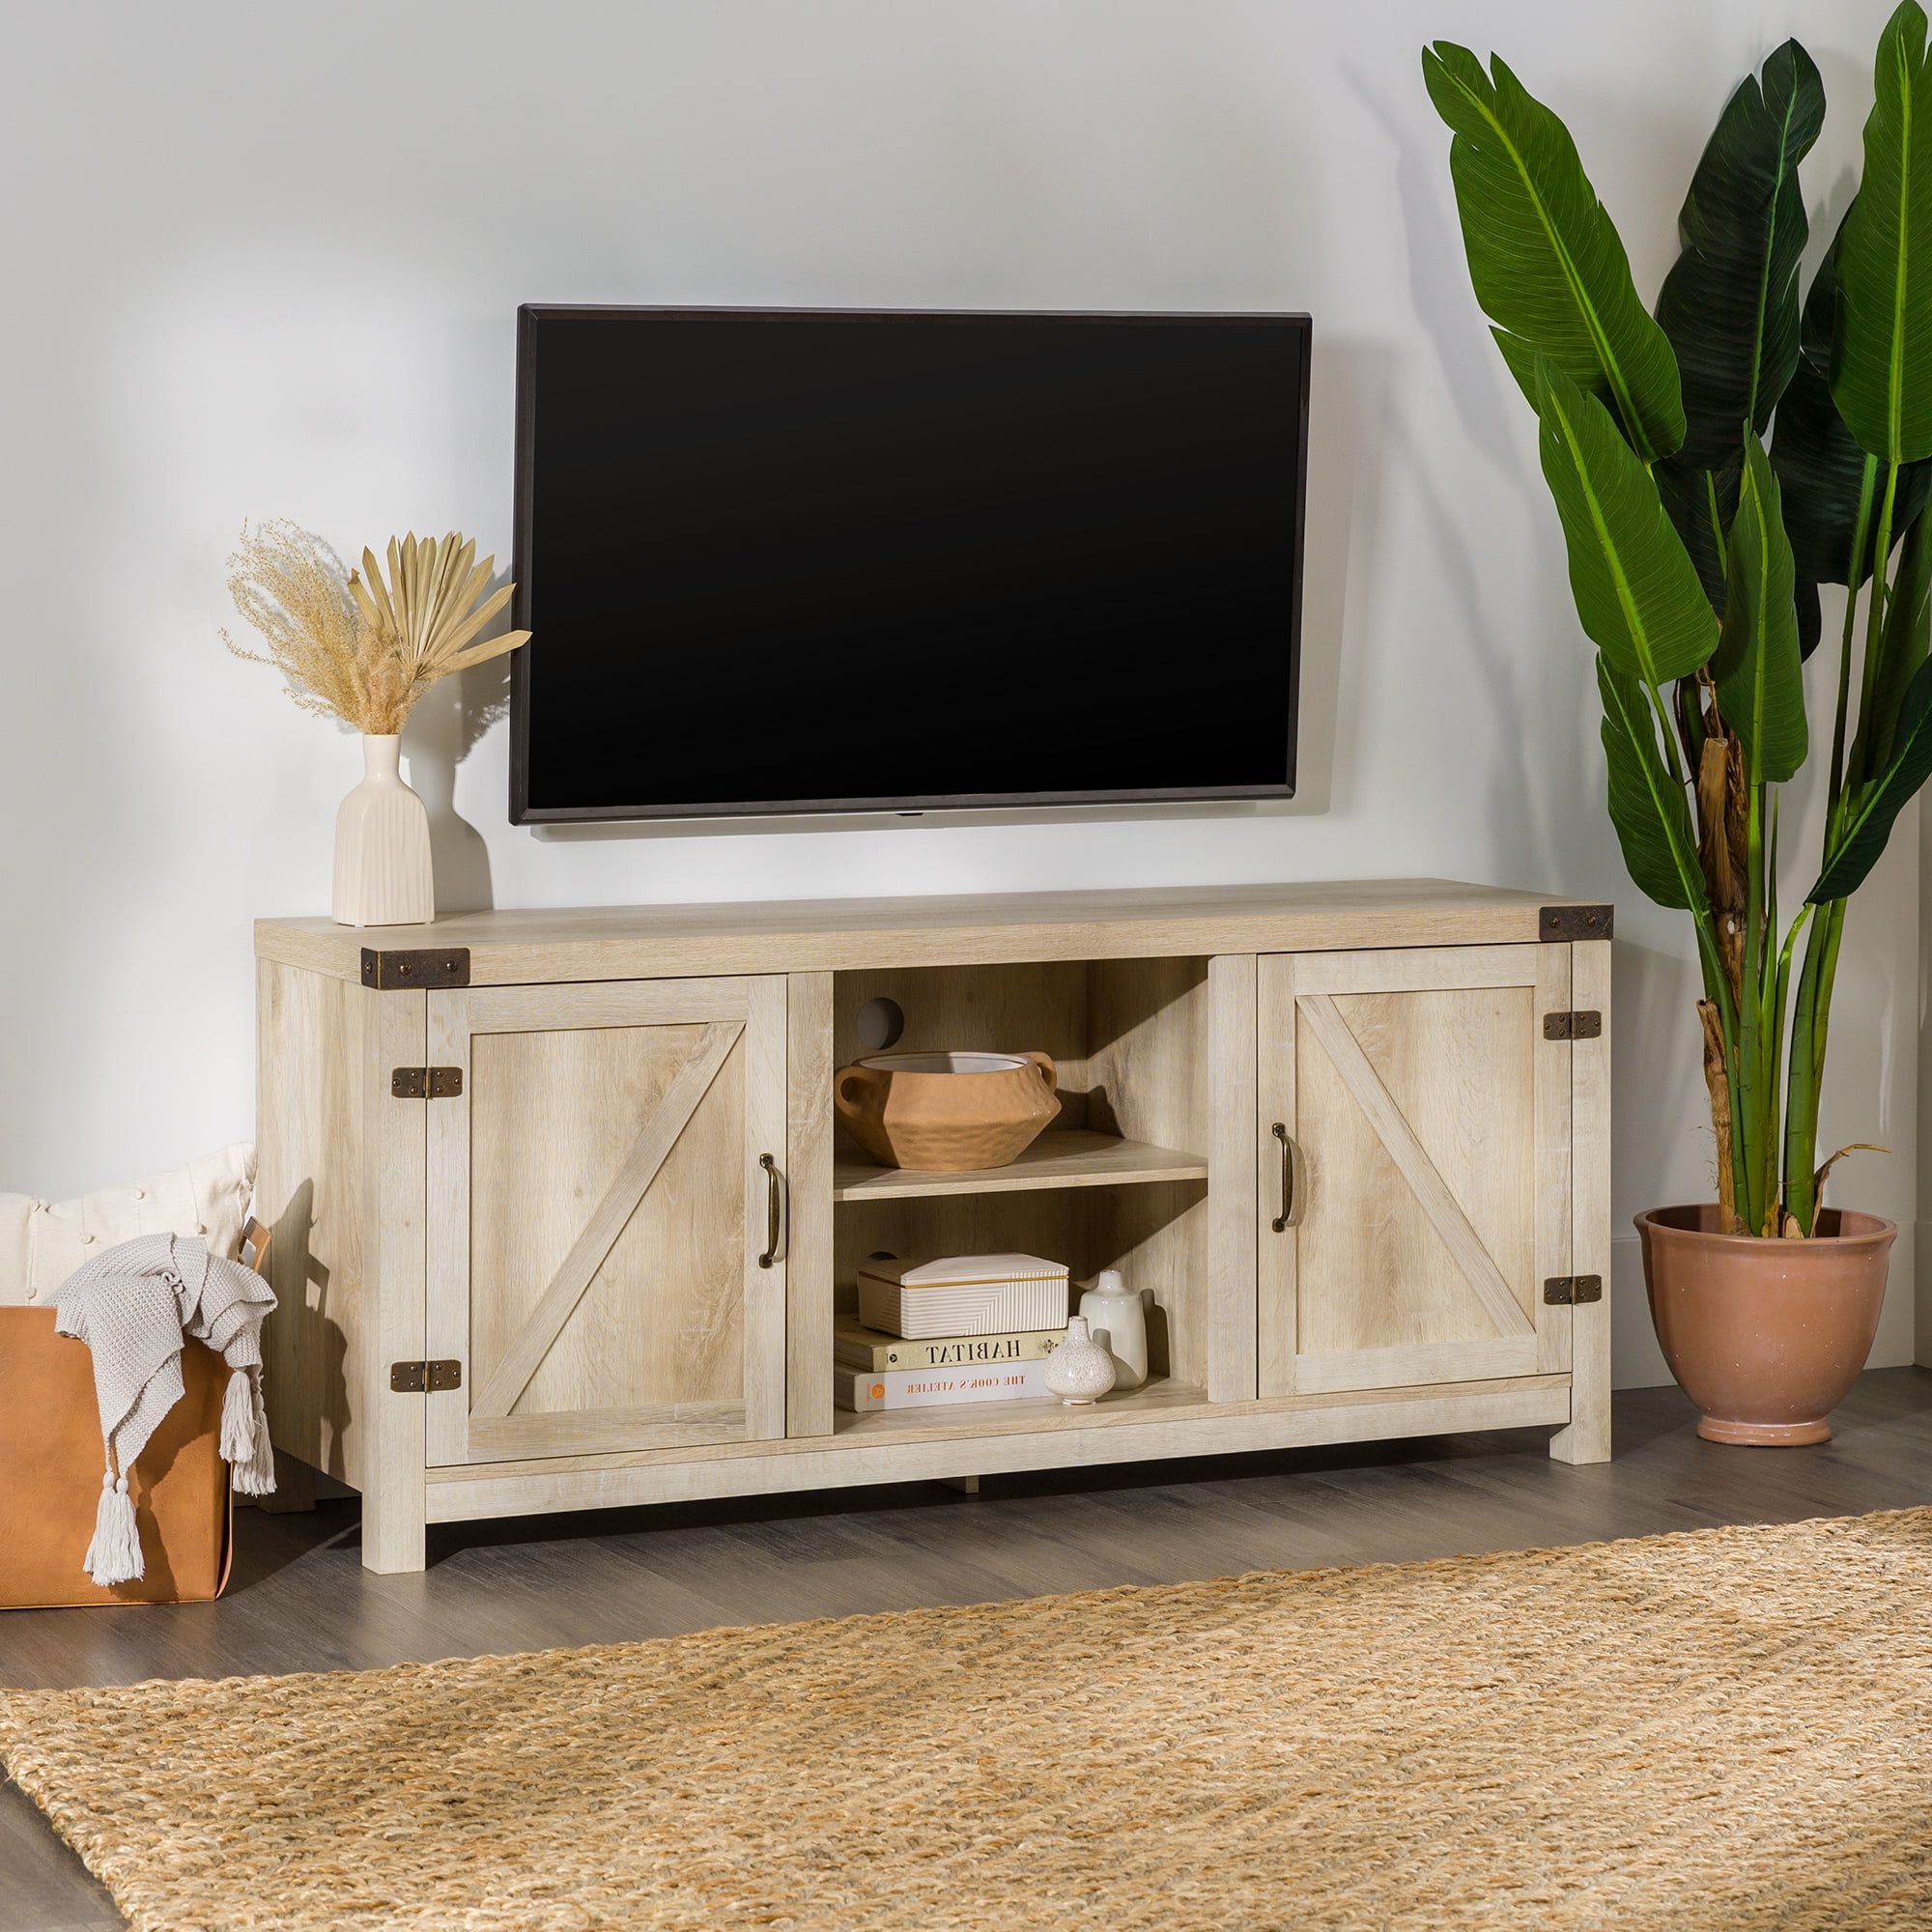 Woven Paths Modern Farmhouse Barn Door Tv Stand For Tvs Up To 65", White  Oak – Walmart In Modern Farmhouse Barn Tv Stands (View 4 of 20)